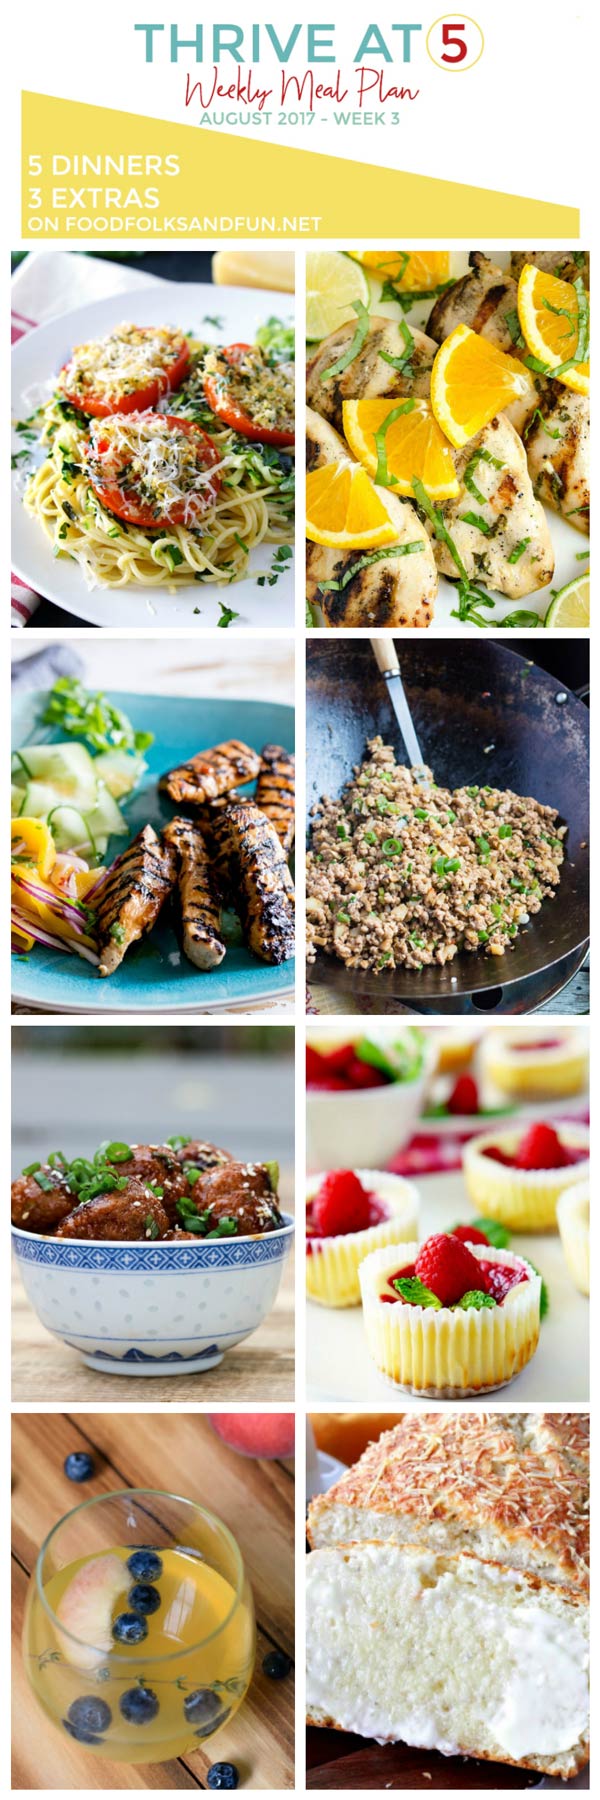 Meal Plan for August week 3